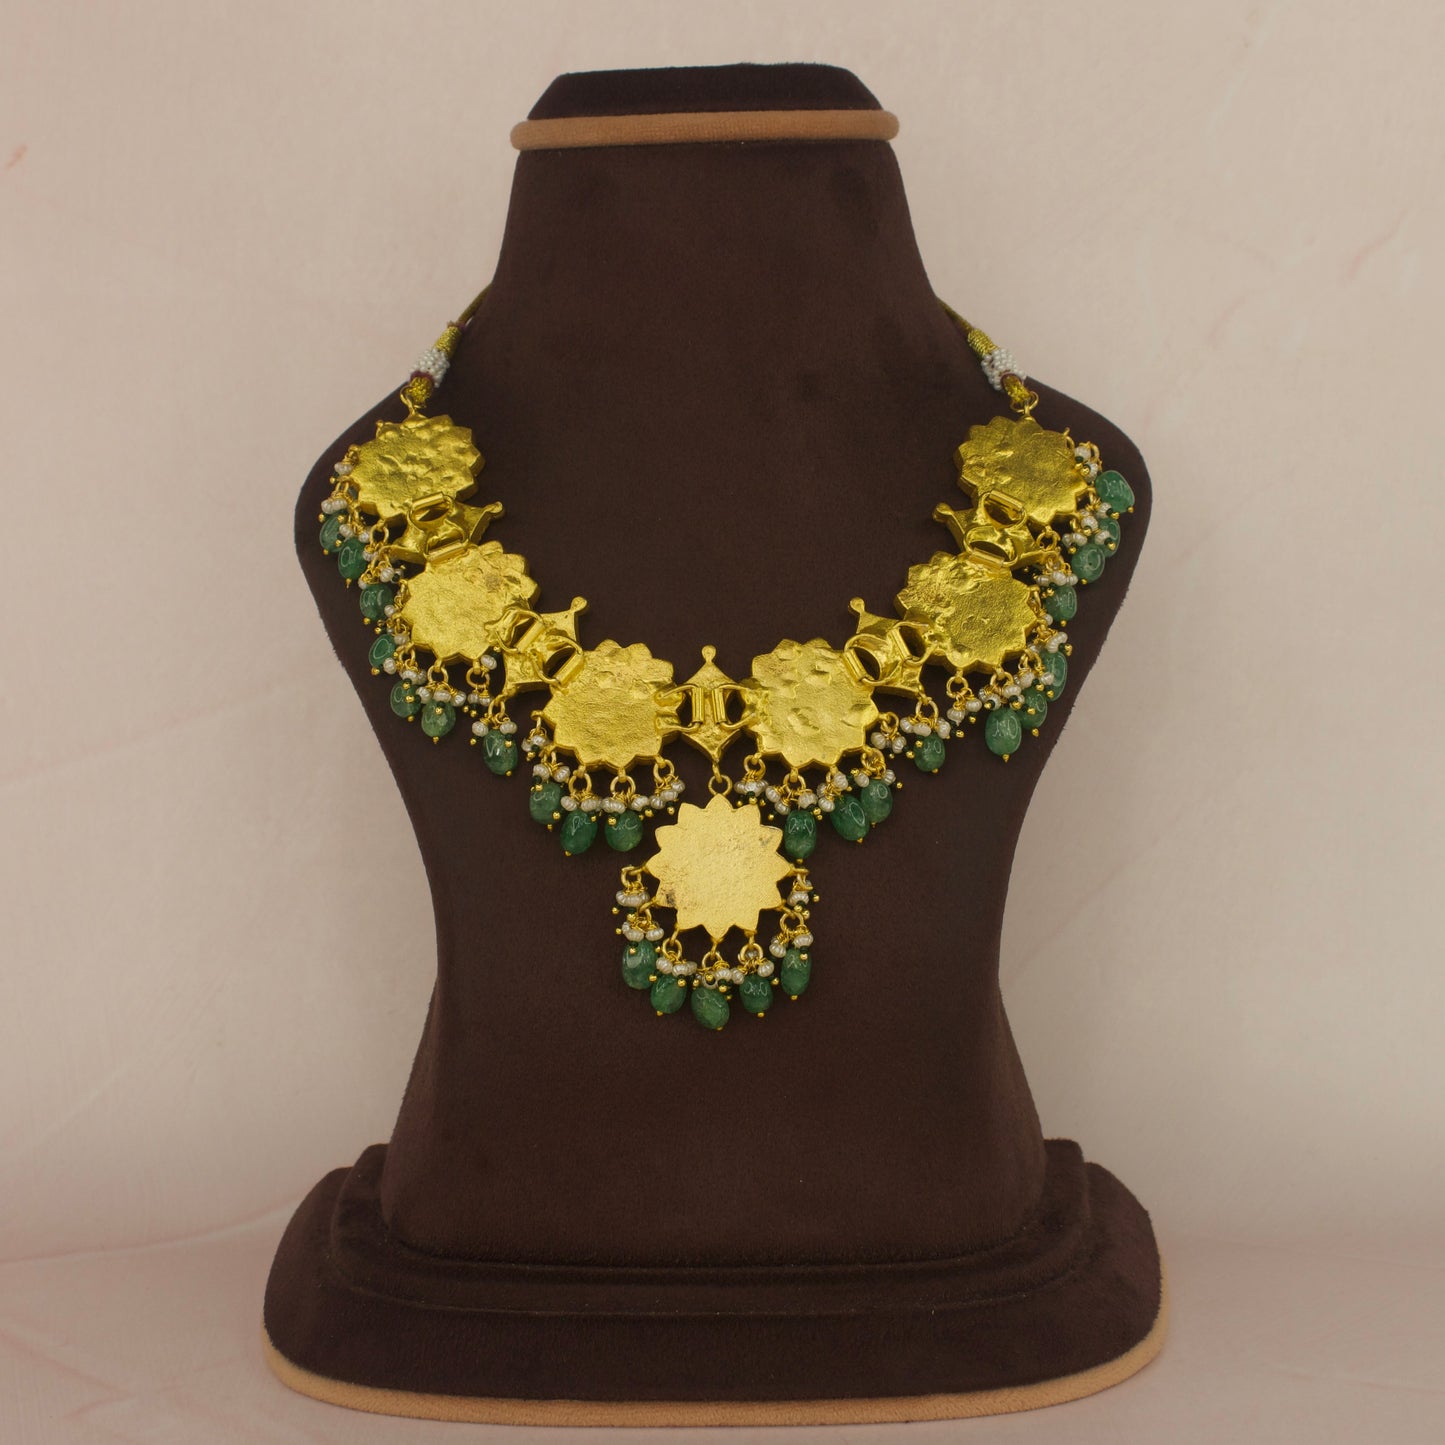 Here is A short Jadau Kundan bottumala necklace with floral design. This necklace has white Kundan stones and green stones in the middle of flowers. This piece is covered with 22k gold plating.